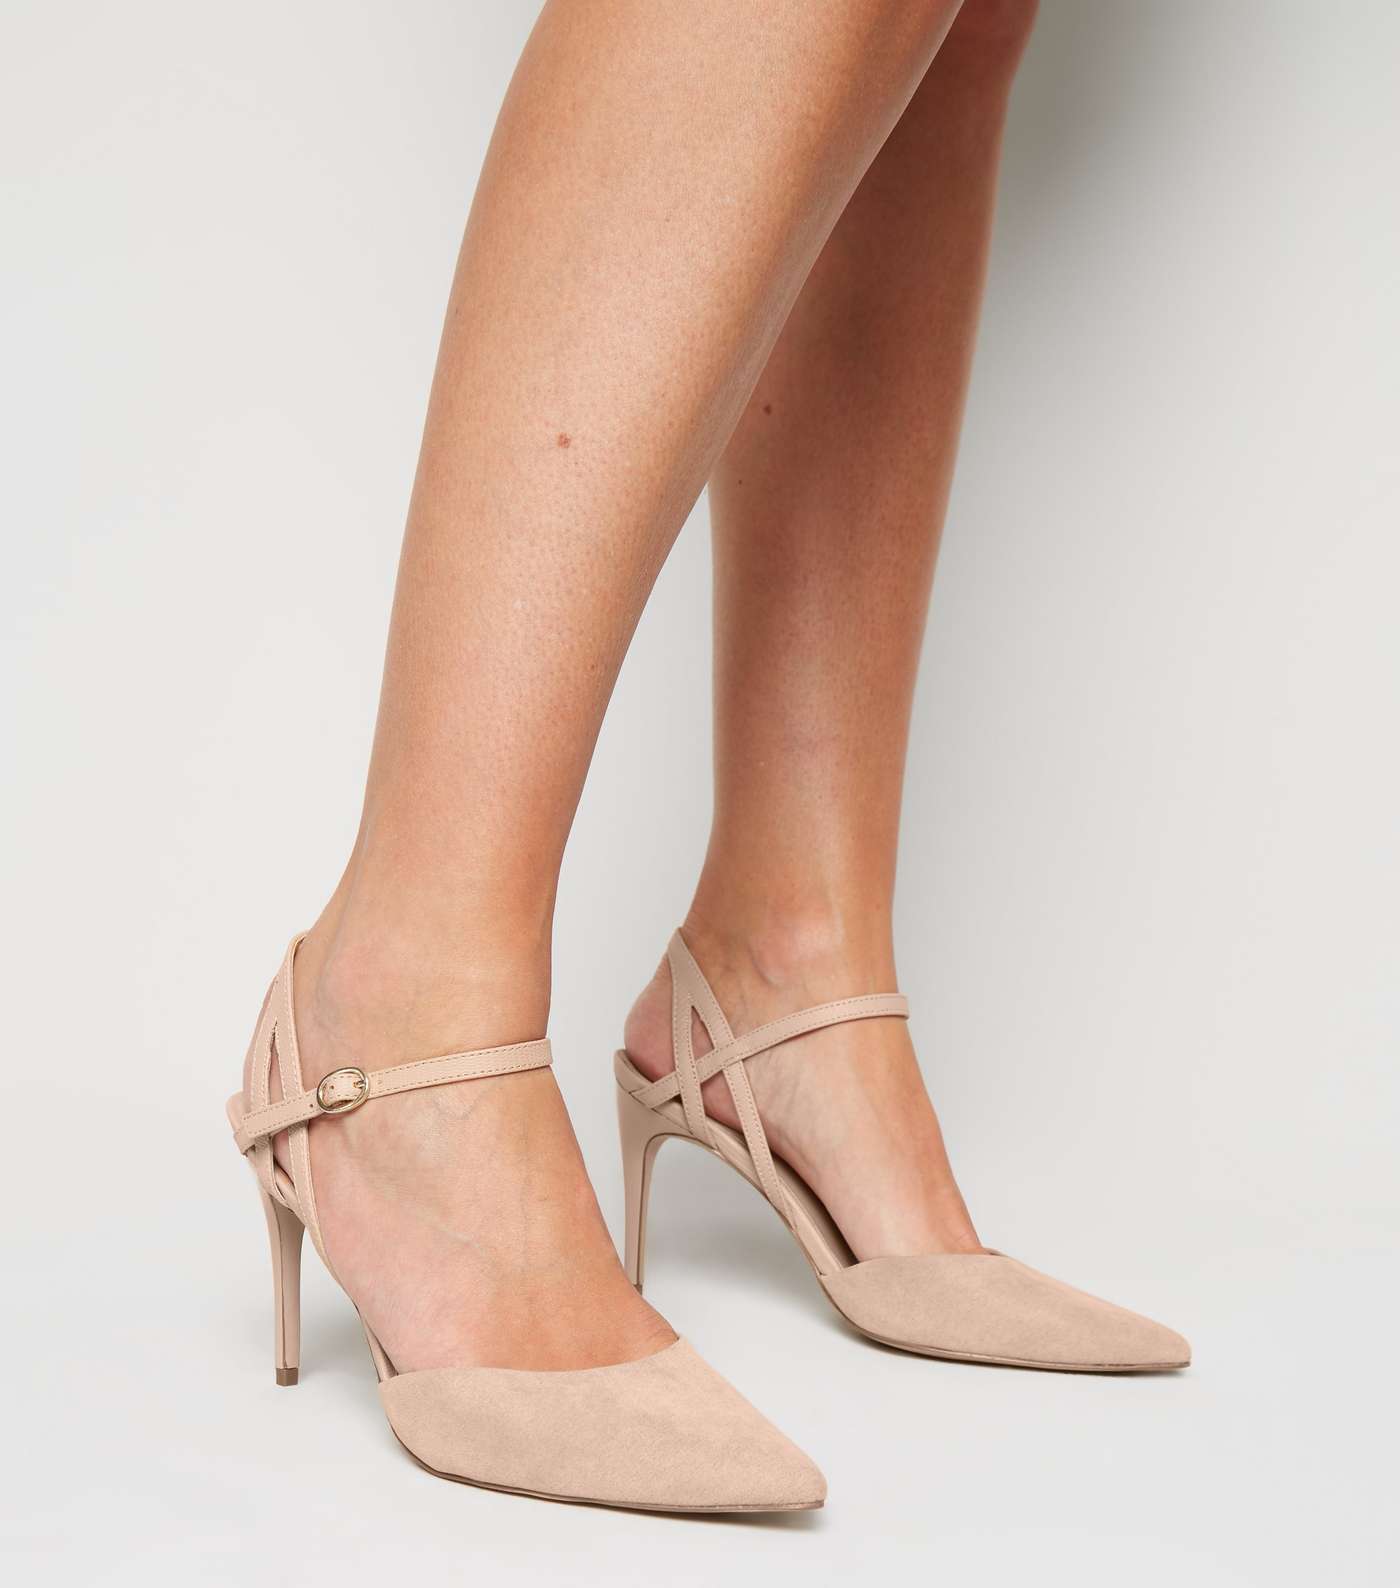 Pale Pink 2 Part Pointed Stiletto Heels Image 2